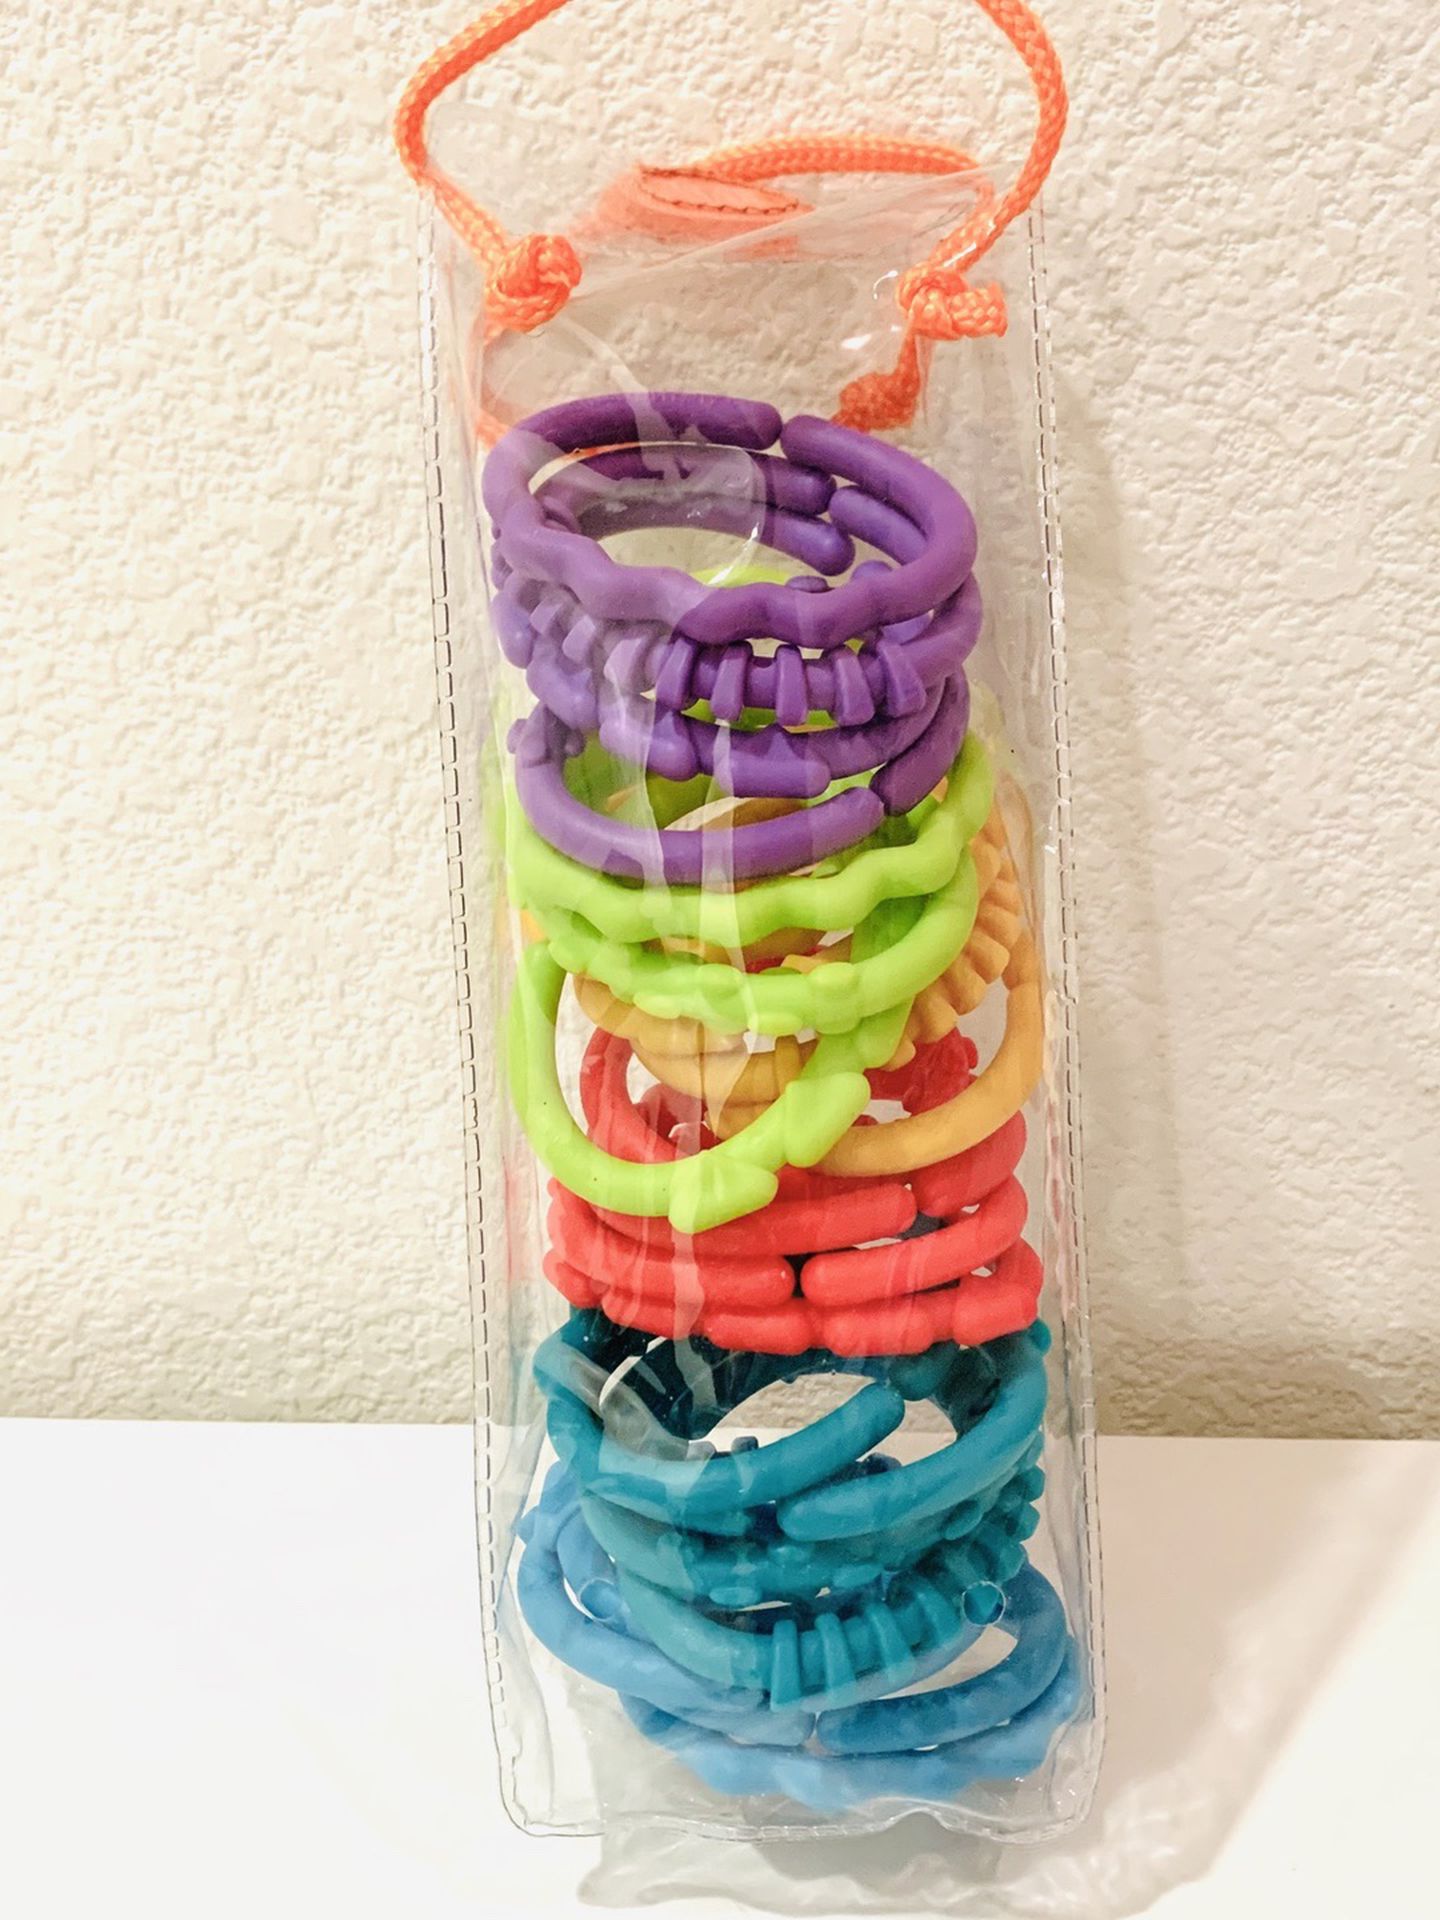 24 Pack Baby Teether Rings Links Toys Colorful Round Connecting Ring for Rattle Strollers Car Seat Travel Toys - Suit for Baby, Infant, Newborn, Kids